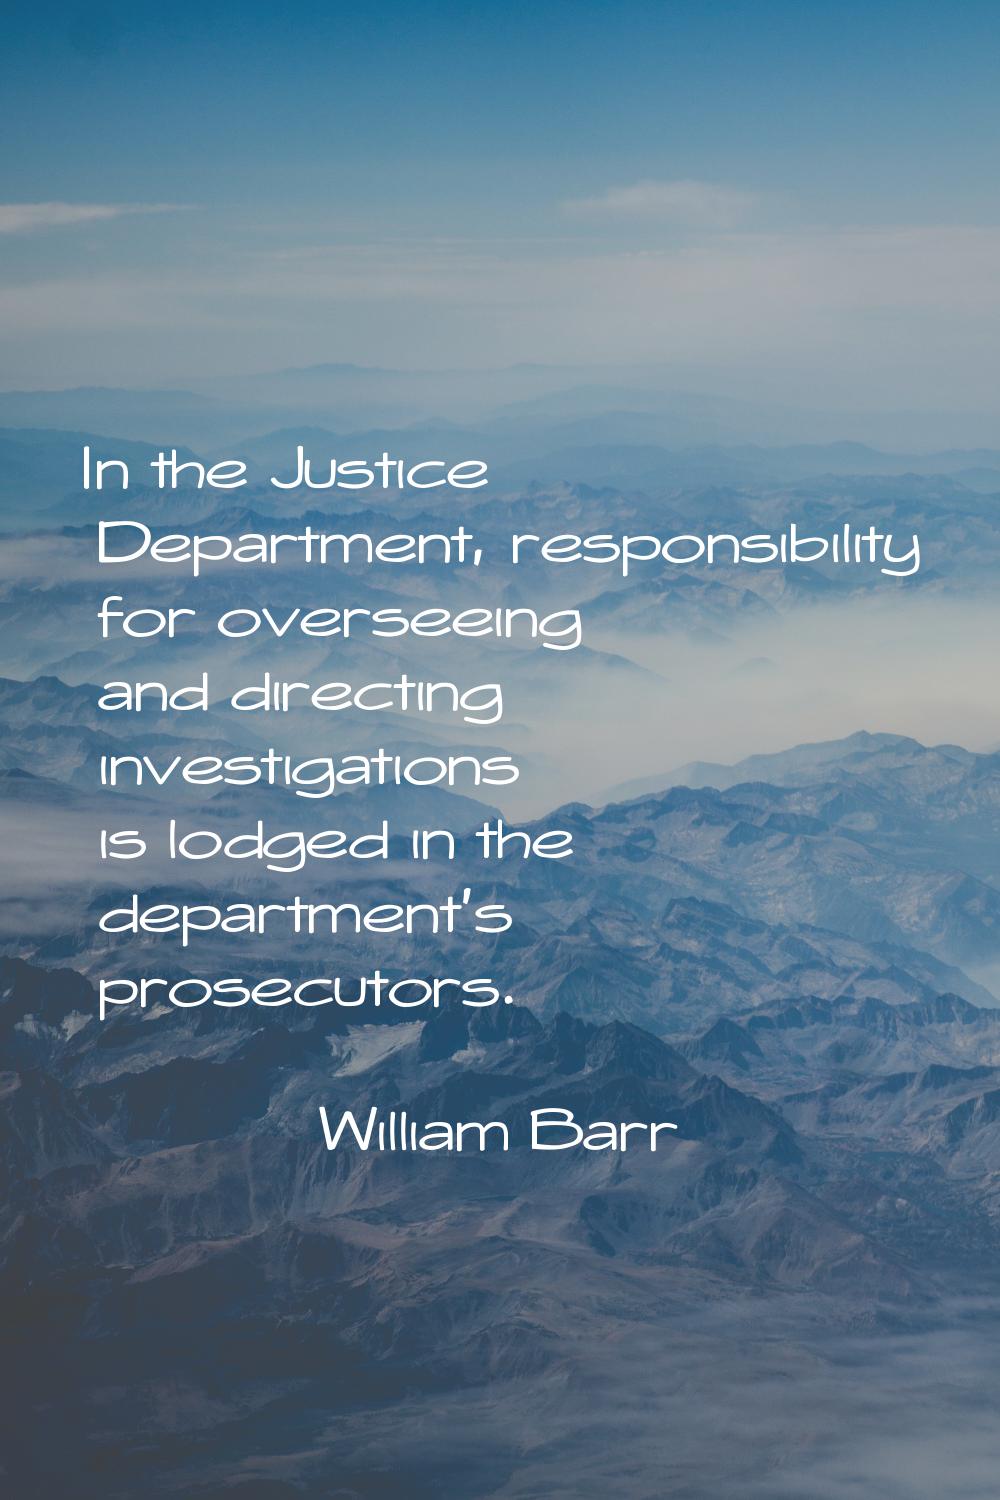 In the Justice Department, responsibility for overseeing and directing investigations is lodged in 